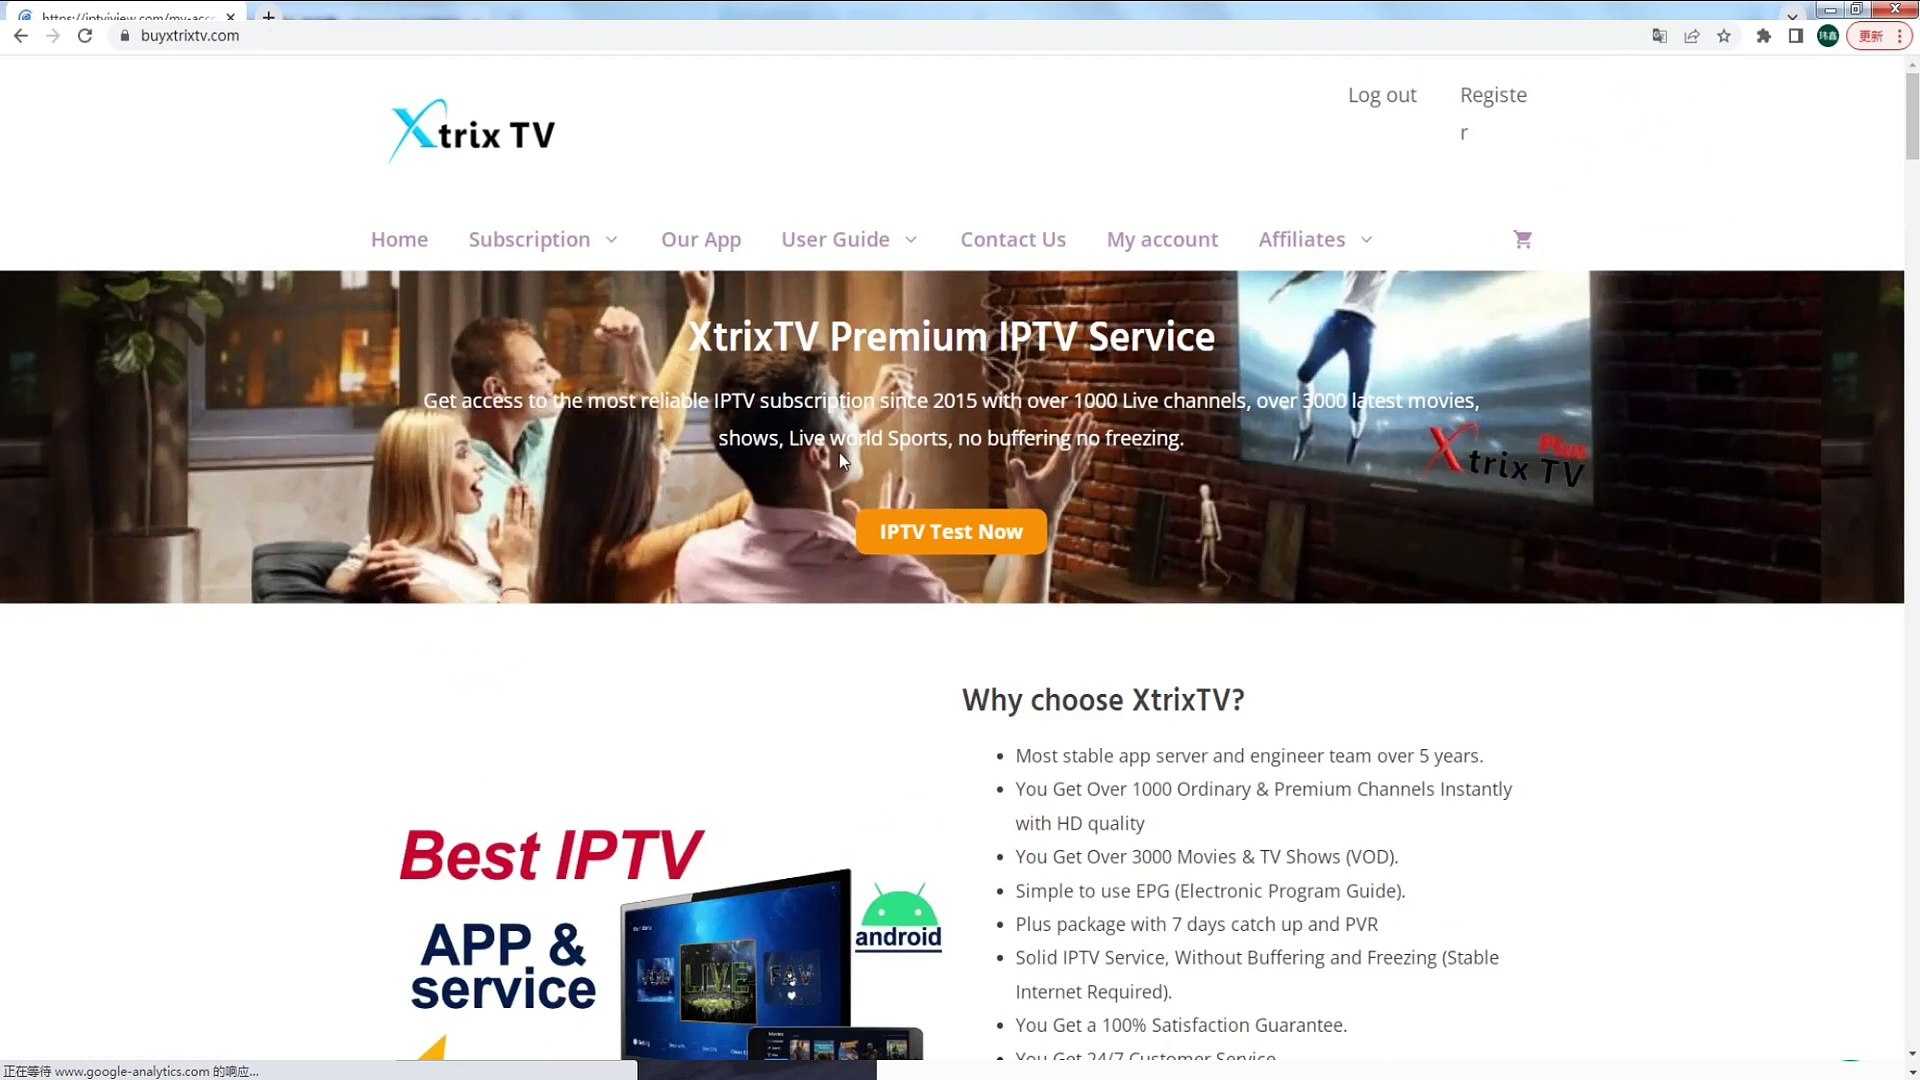 How to Get IPTV Free Trial and activation on Firestick - XtrixTV IPTV